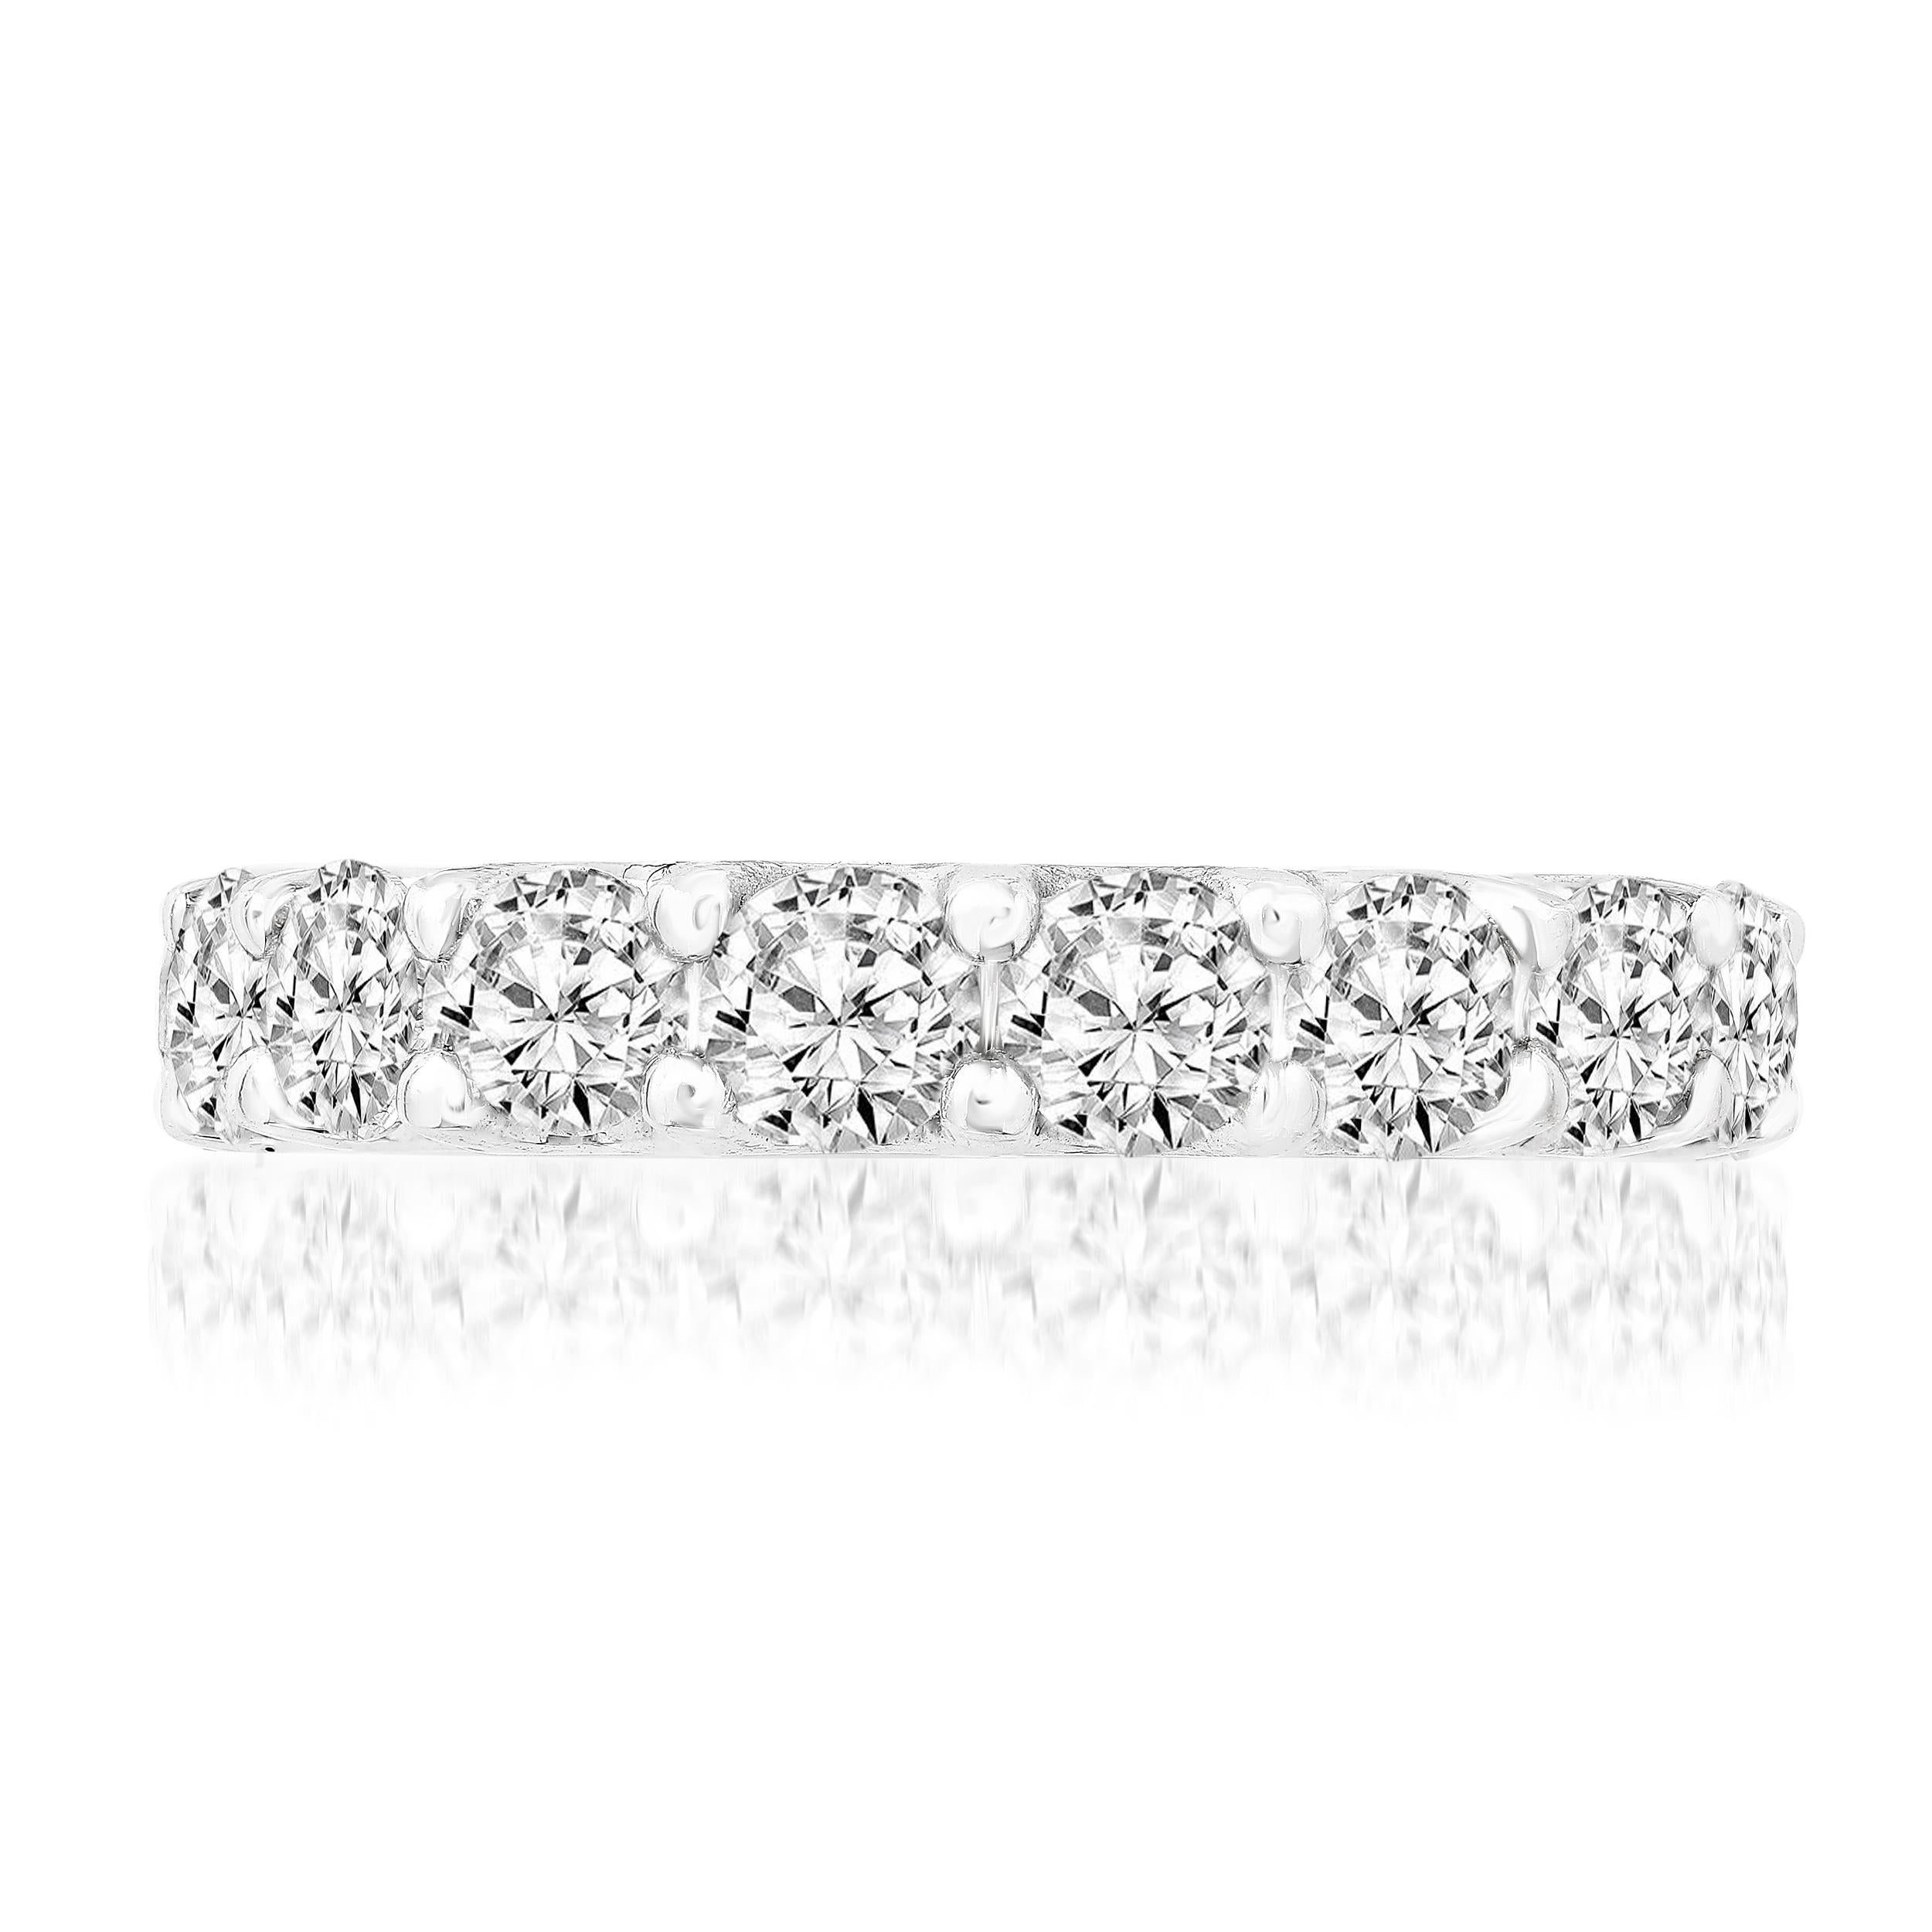 A luxurious and vibrant eternity wedding band showcasing 17 round brilliant diamonds set in a shared prong setting. Diamonds weigh 4.01 carats total. Made in polished 14k White Gold. 

Size 6.5 US (Sizable). One of a Kind  piece.
All diamonds are GH